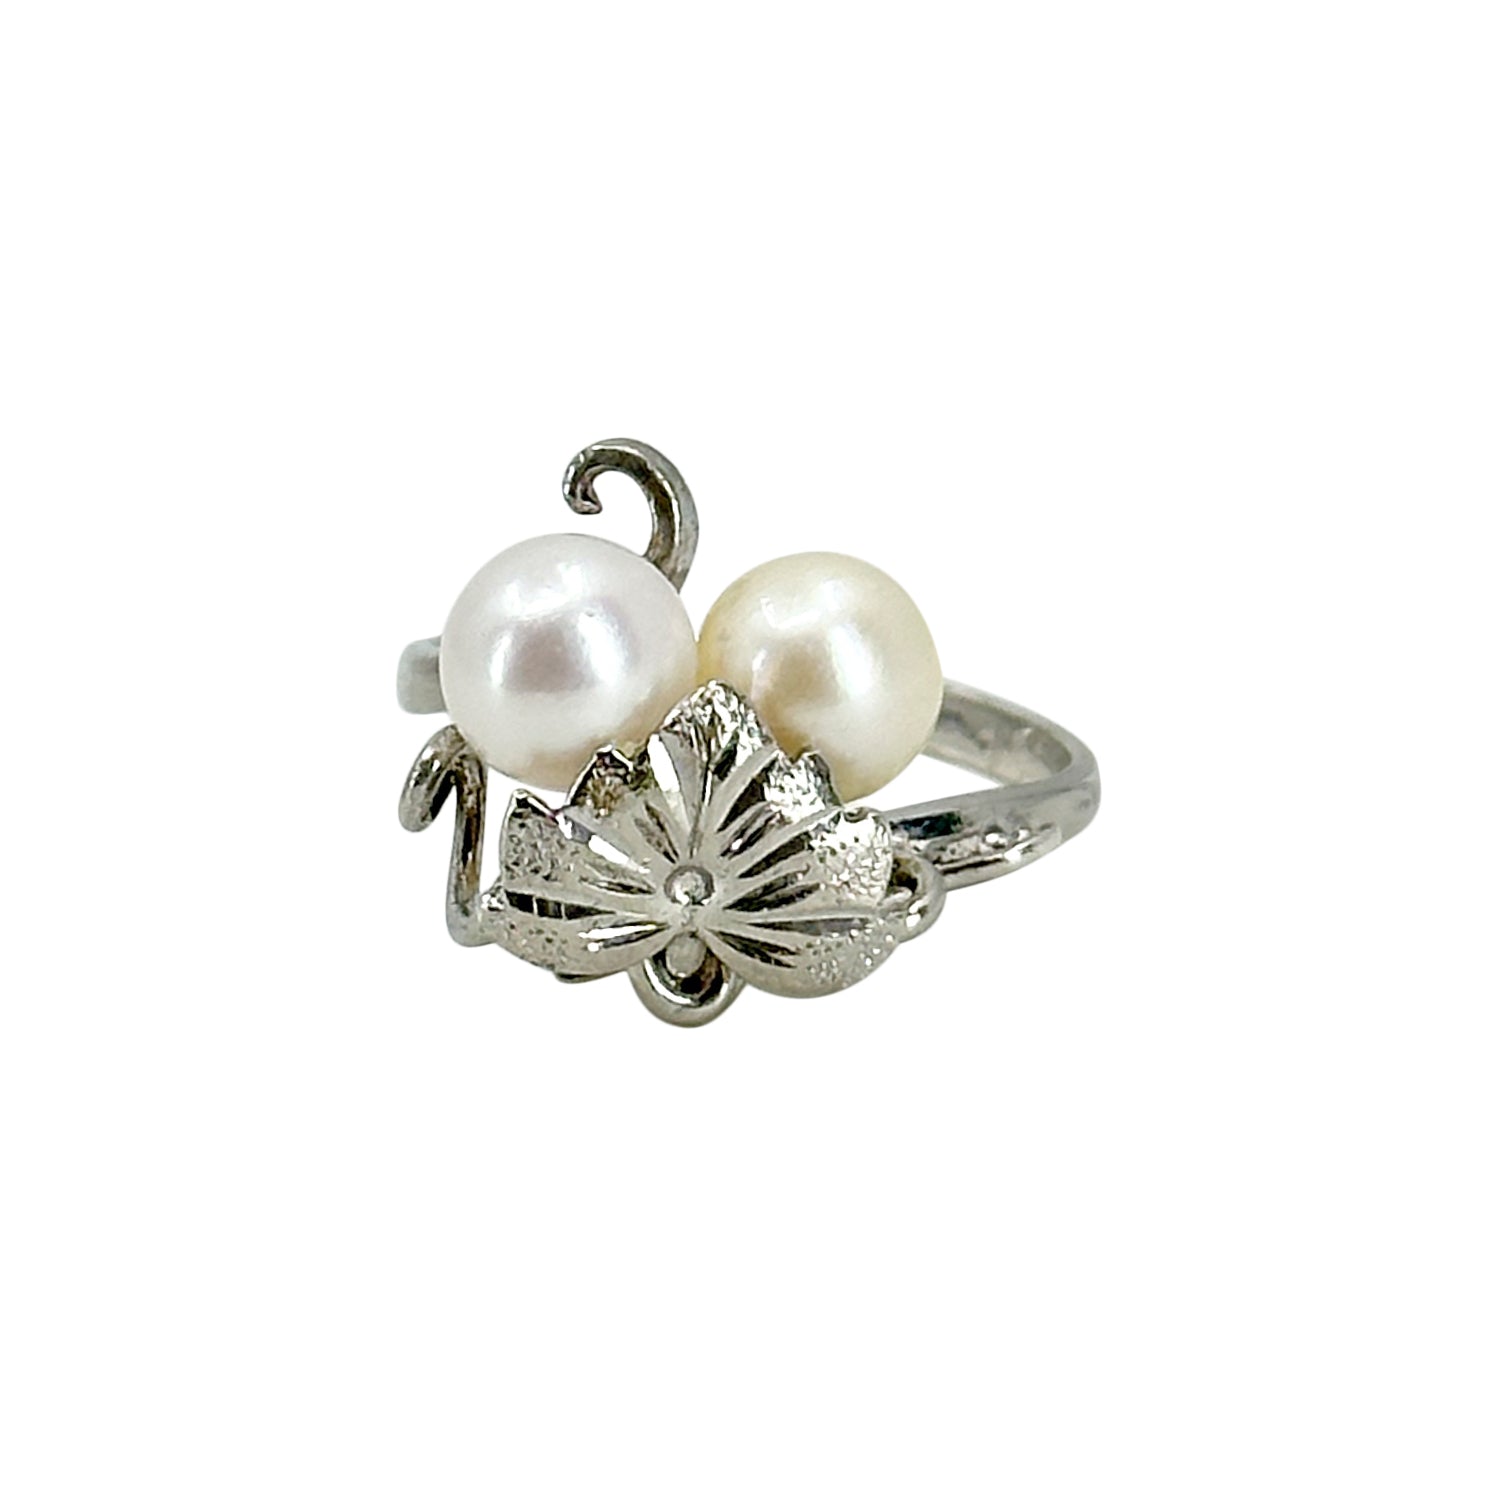 Grape Cream & White Japanese Saltwater Akoya Cultured Pearl Ring- Sterling Silver Sz 6.25